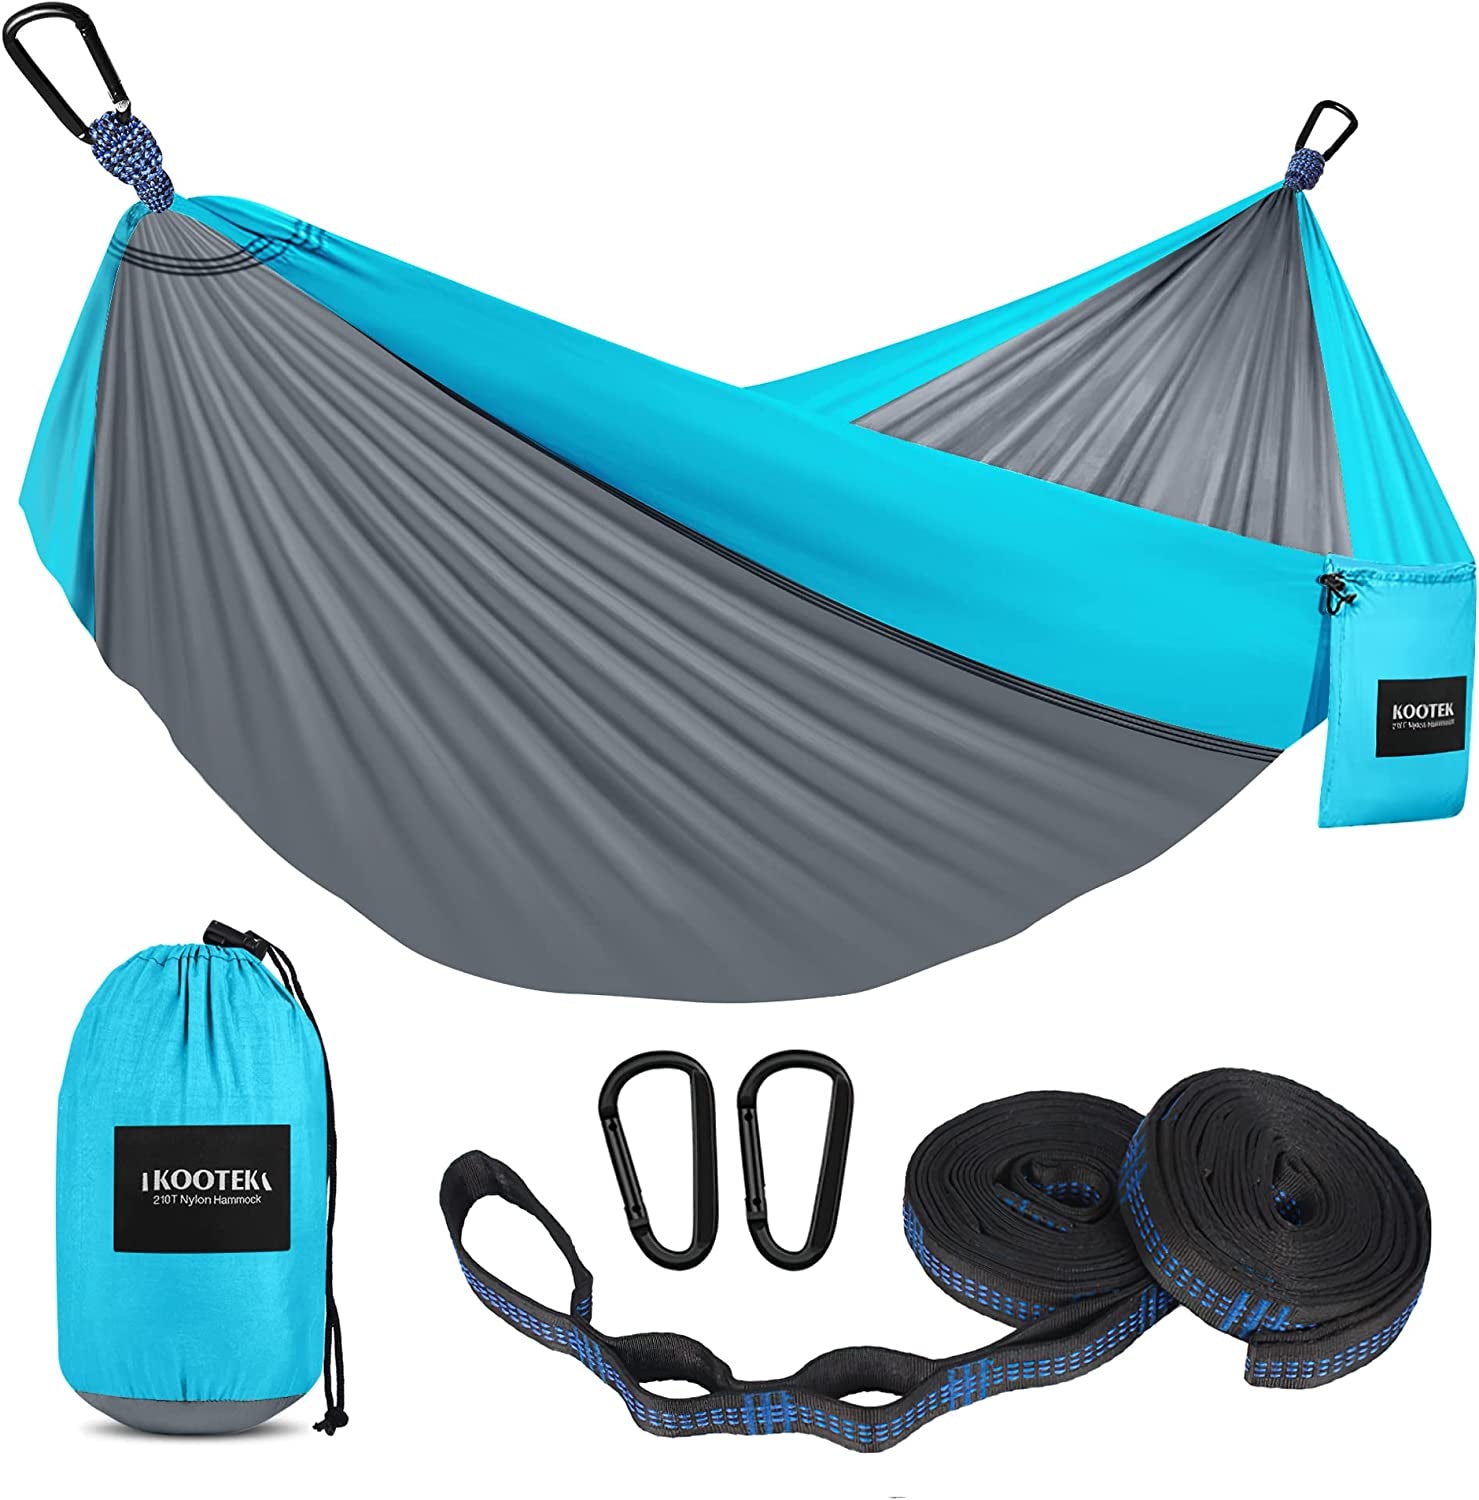 Portable Double and Single Camping Hammocks - Essential Outdoor Accessories for Backpacking, Travel, Beach, Backyard, Patio, and Hiking